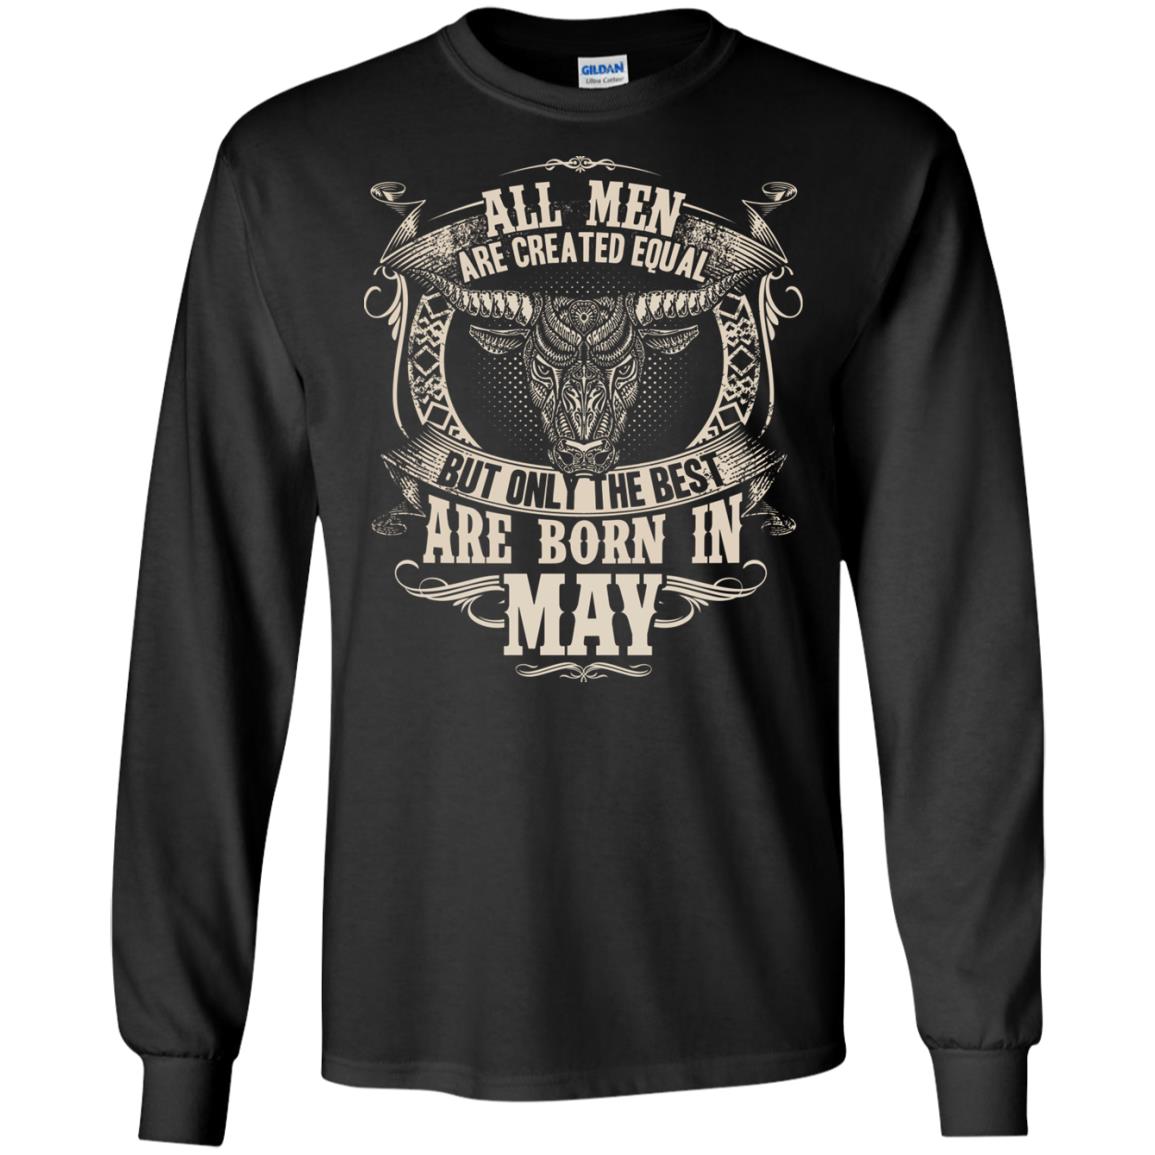 All Men Are Created Equal, But Only The Best Are Born In May T-shirtG240 Gildan LS Ultra Cotton T-Shirt